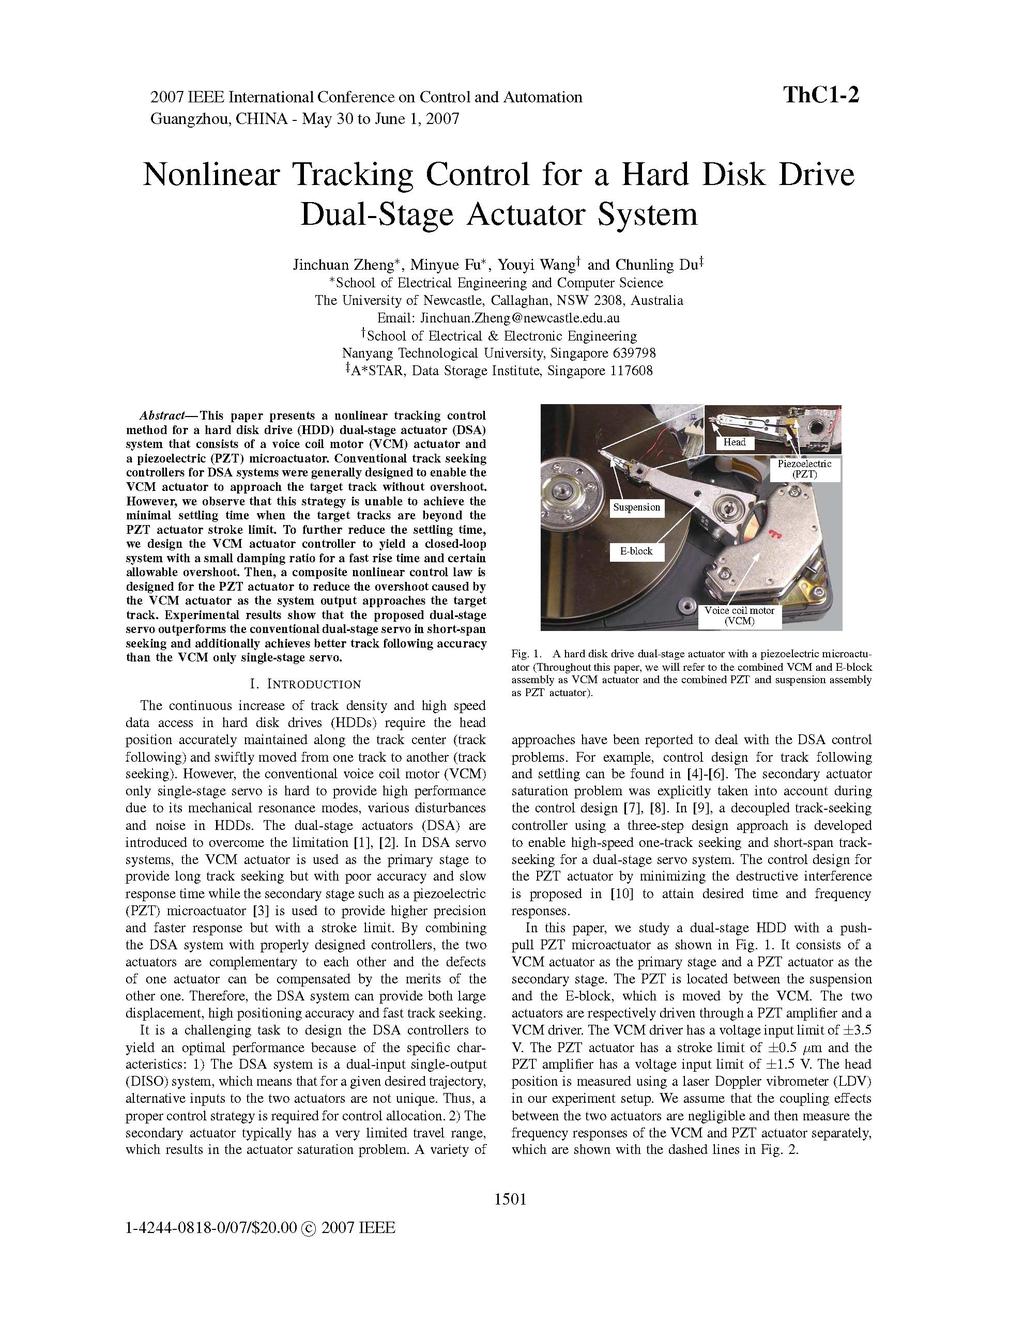 27 IEEE International Conference on Control and Automation ThCl-2 Guangzhou, CHINA - May 3 to June 1, 27 Nonlinear Tracking Control for a Hard Disk Drive Dual-Stage Actuator System Jinchuan Zheng*,